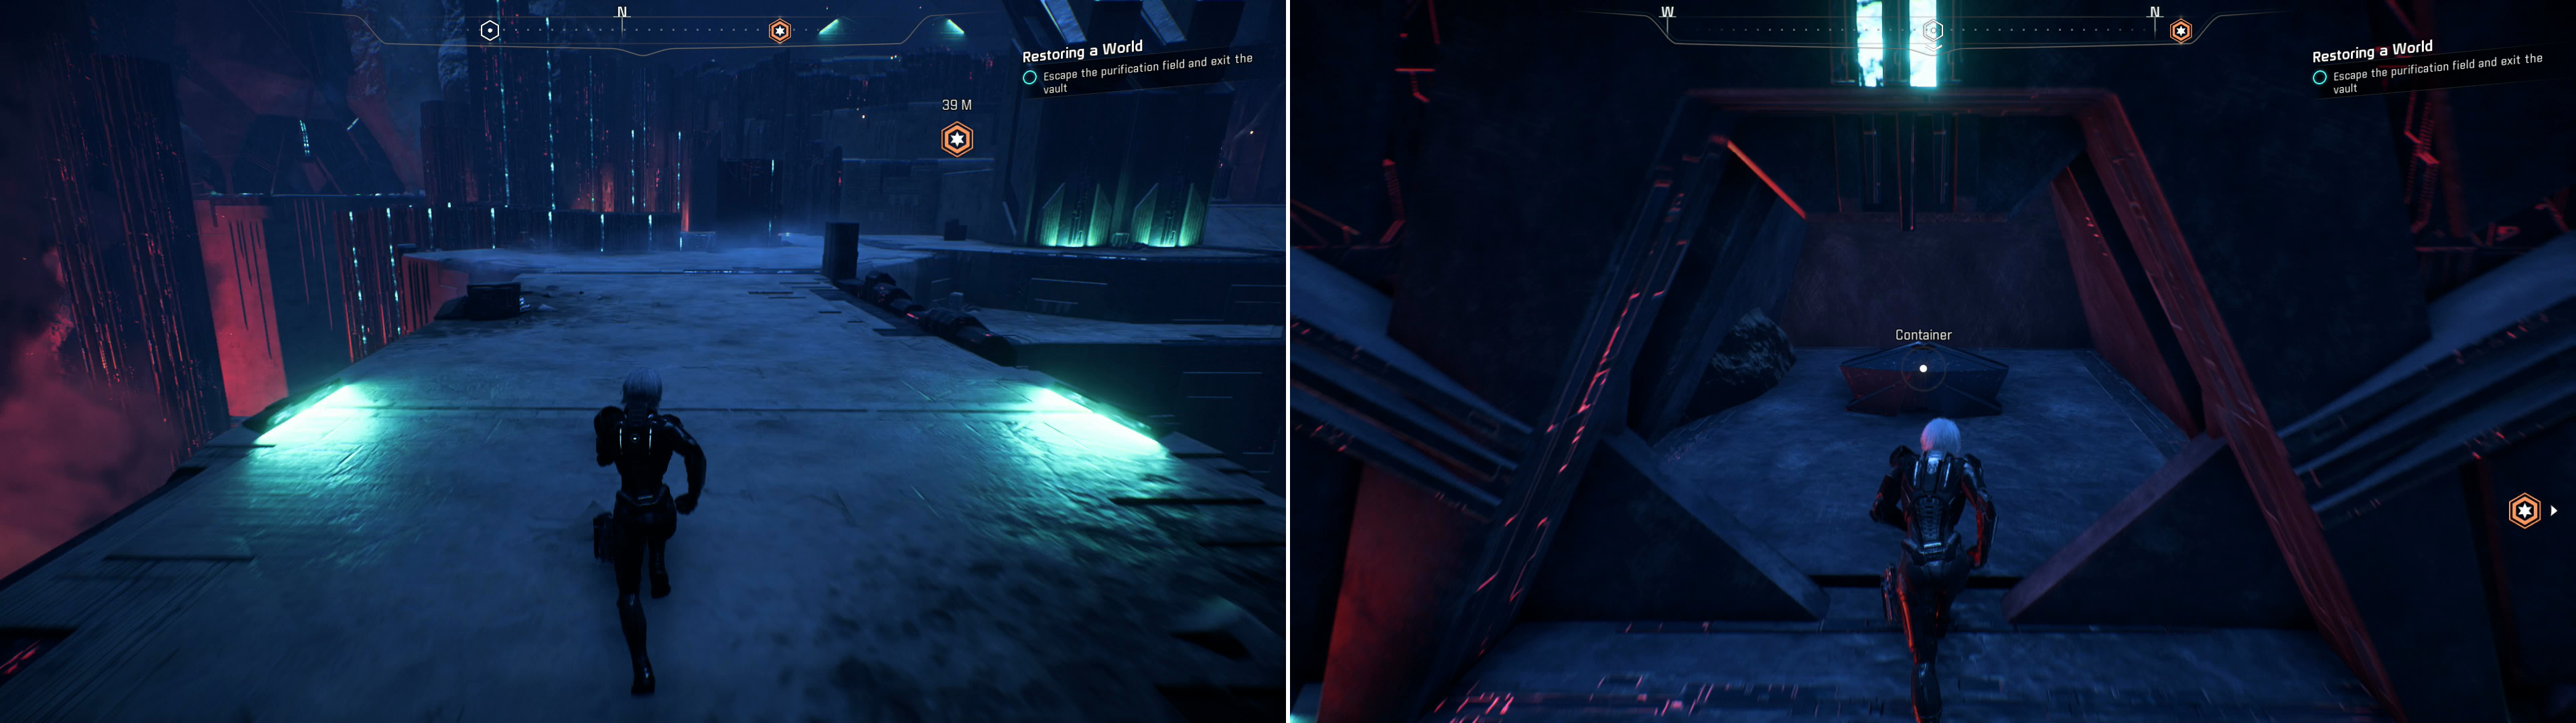 Flee from the purification field (left). If you disabled the barrier to the treasure room earlier, you may wish to hazard a detour to claim some loot (right).